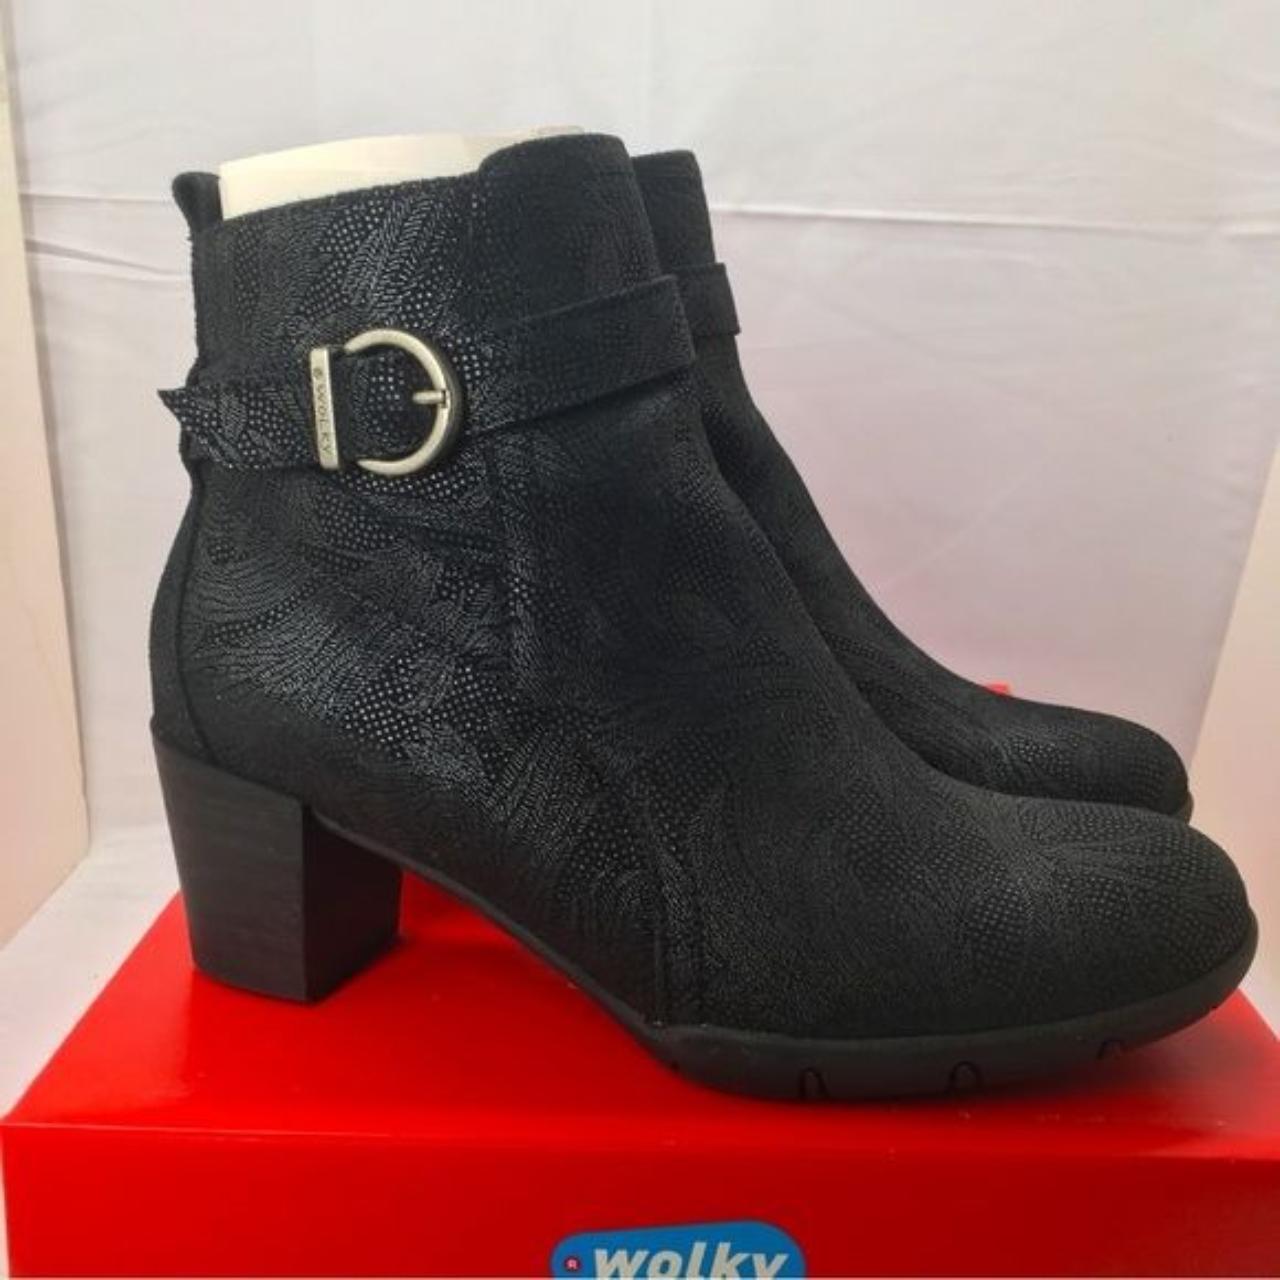 Wolky, Nampa, Black Palm Metal Suede Ankle Boots, US... - Depop